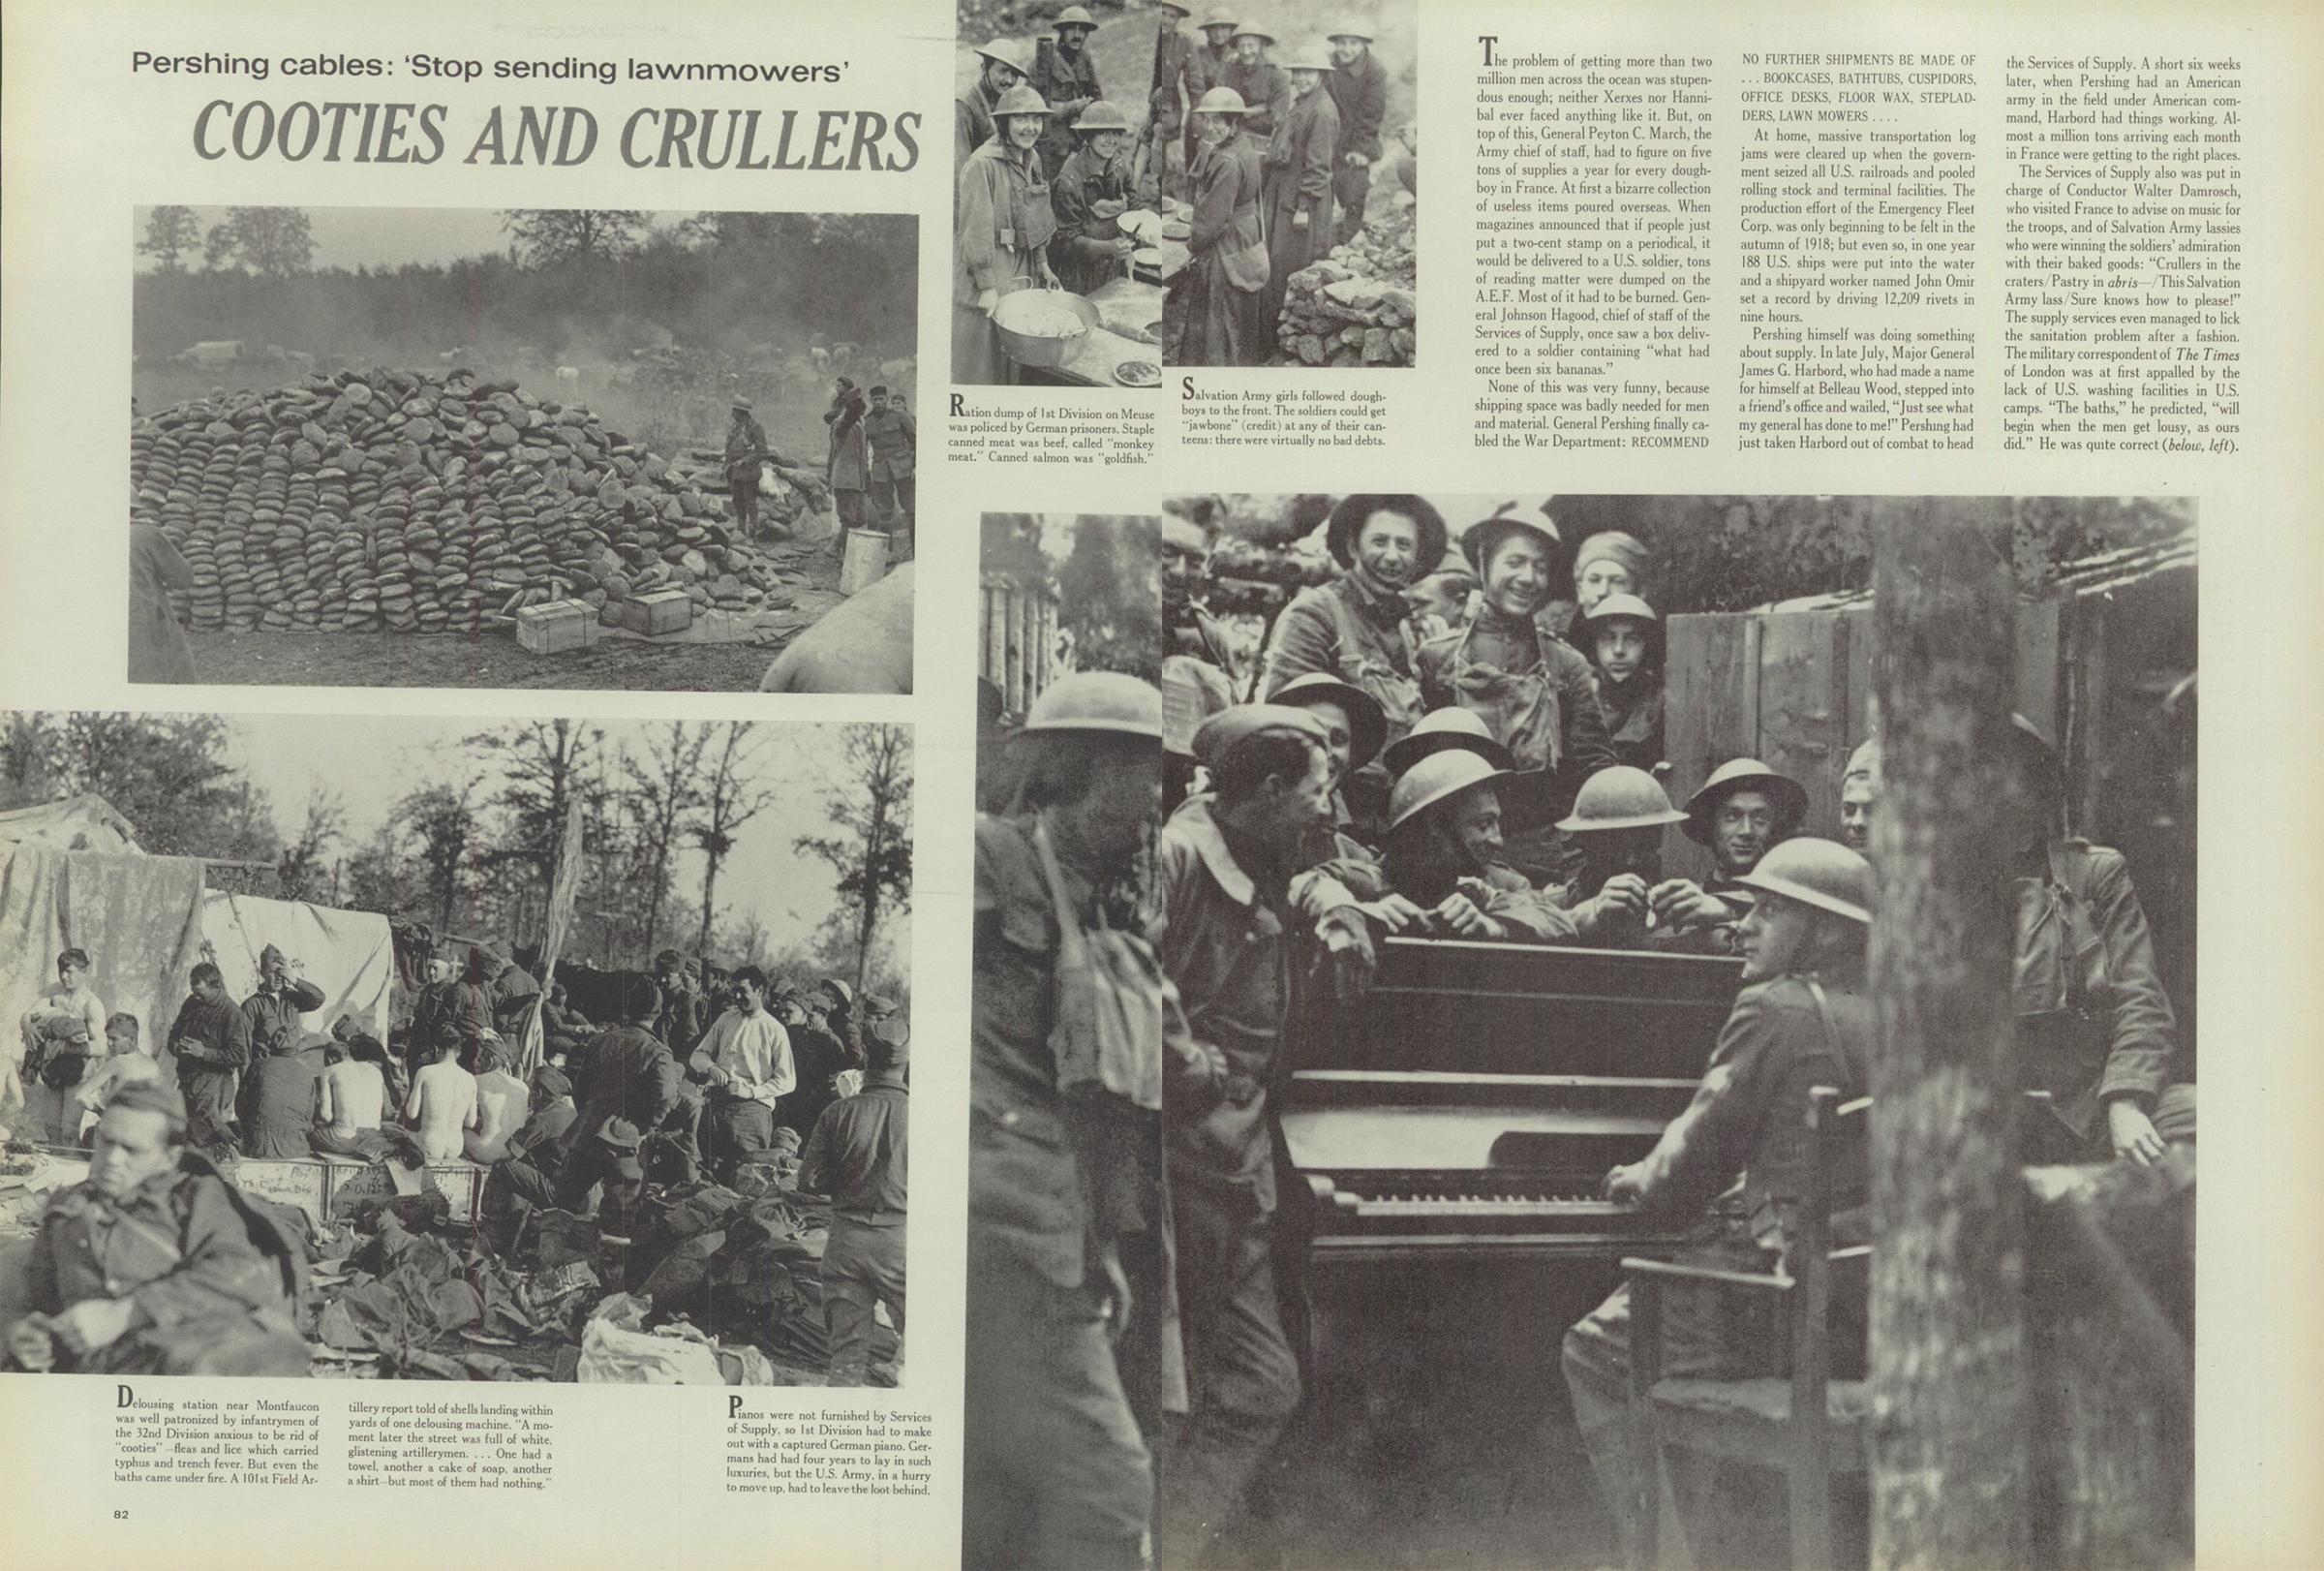 Part V of the First World War series in LIFE magazine from the May 22, 1964 issue.